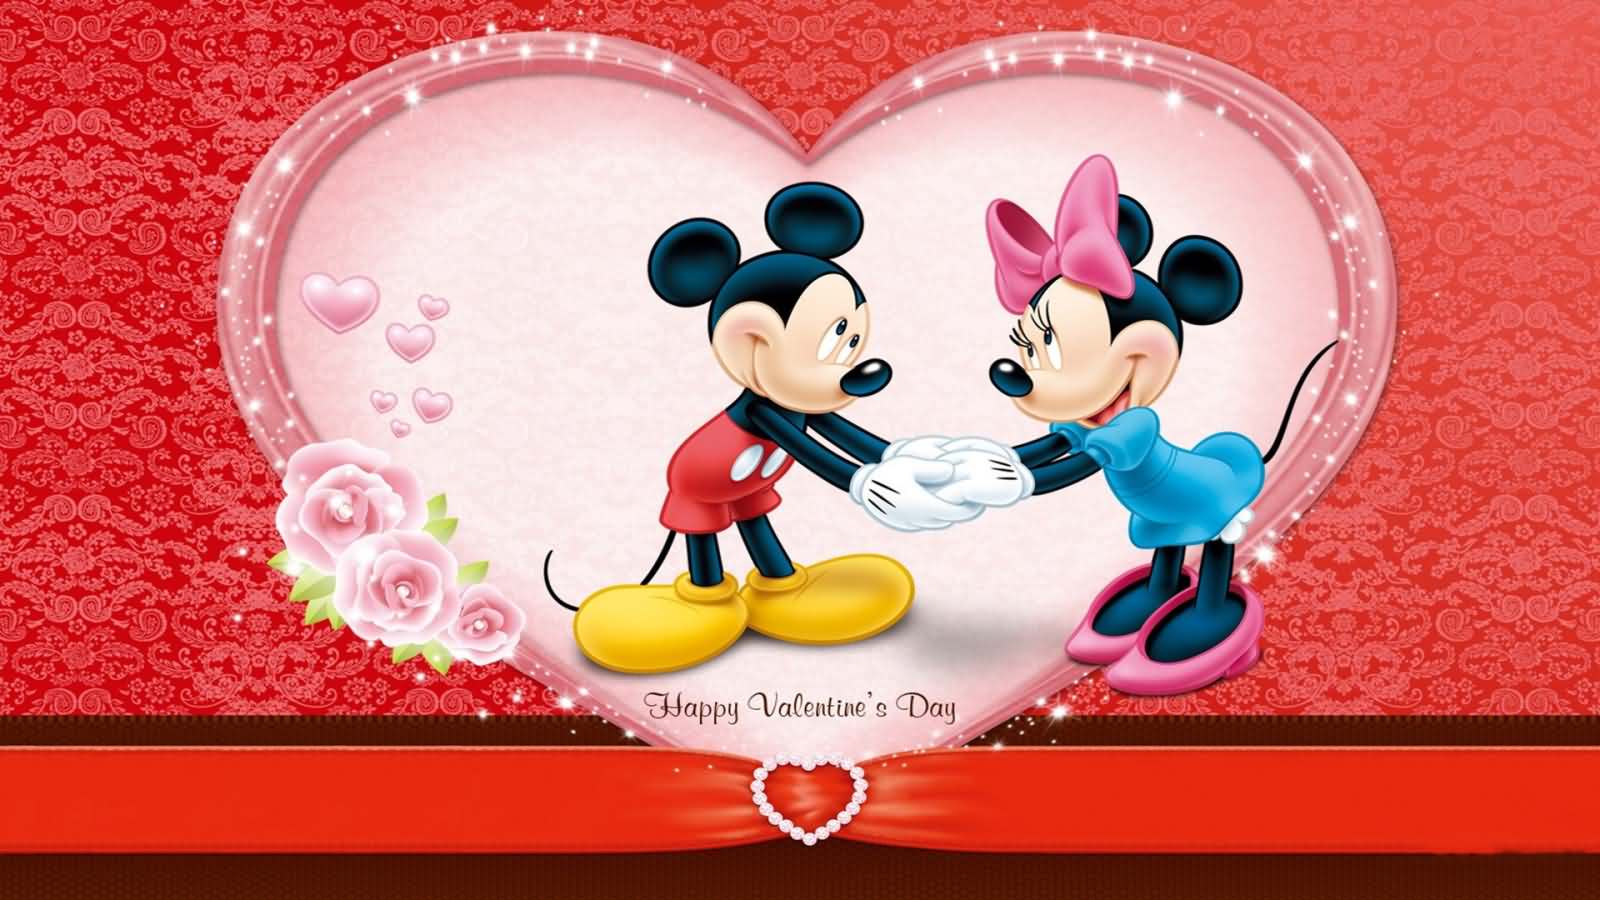 Mickey And Minnie Mouse In Love wishes Happy Valentine Day greeting cards